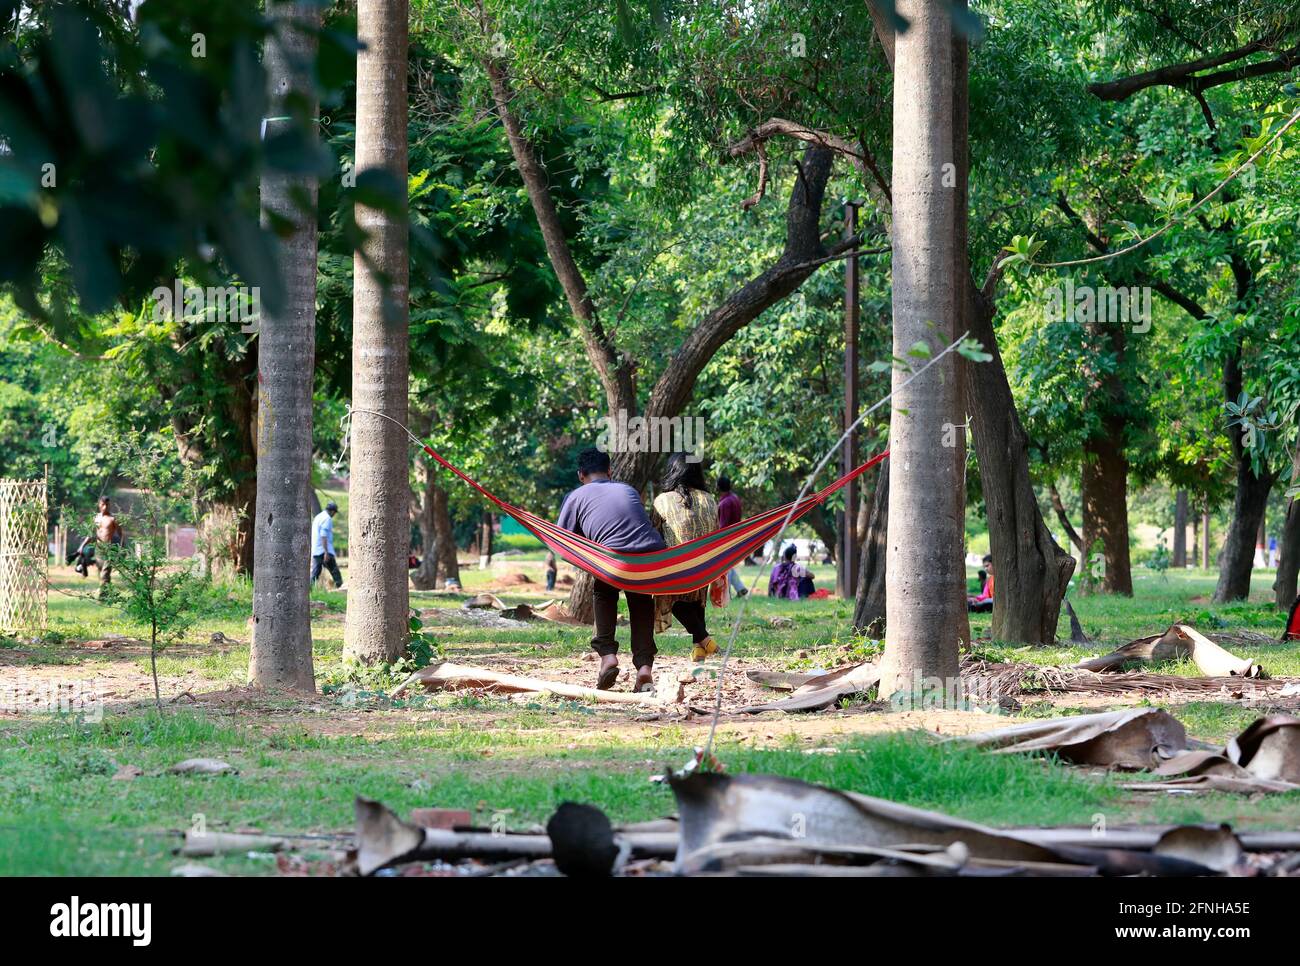 Dhaka, Bangladesh - May 17, 2021: It is summer in Bangladesh so for a little relief, a couple is sitting on a hammock with two trees at Suhrawardy Udy Stock Photo